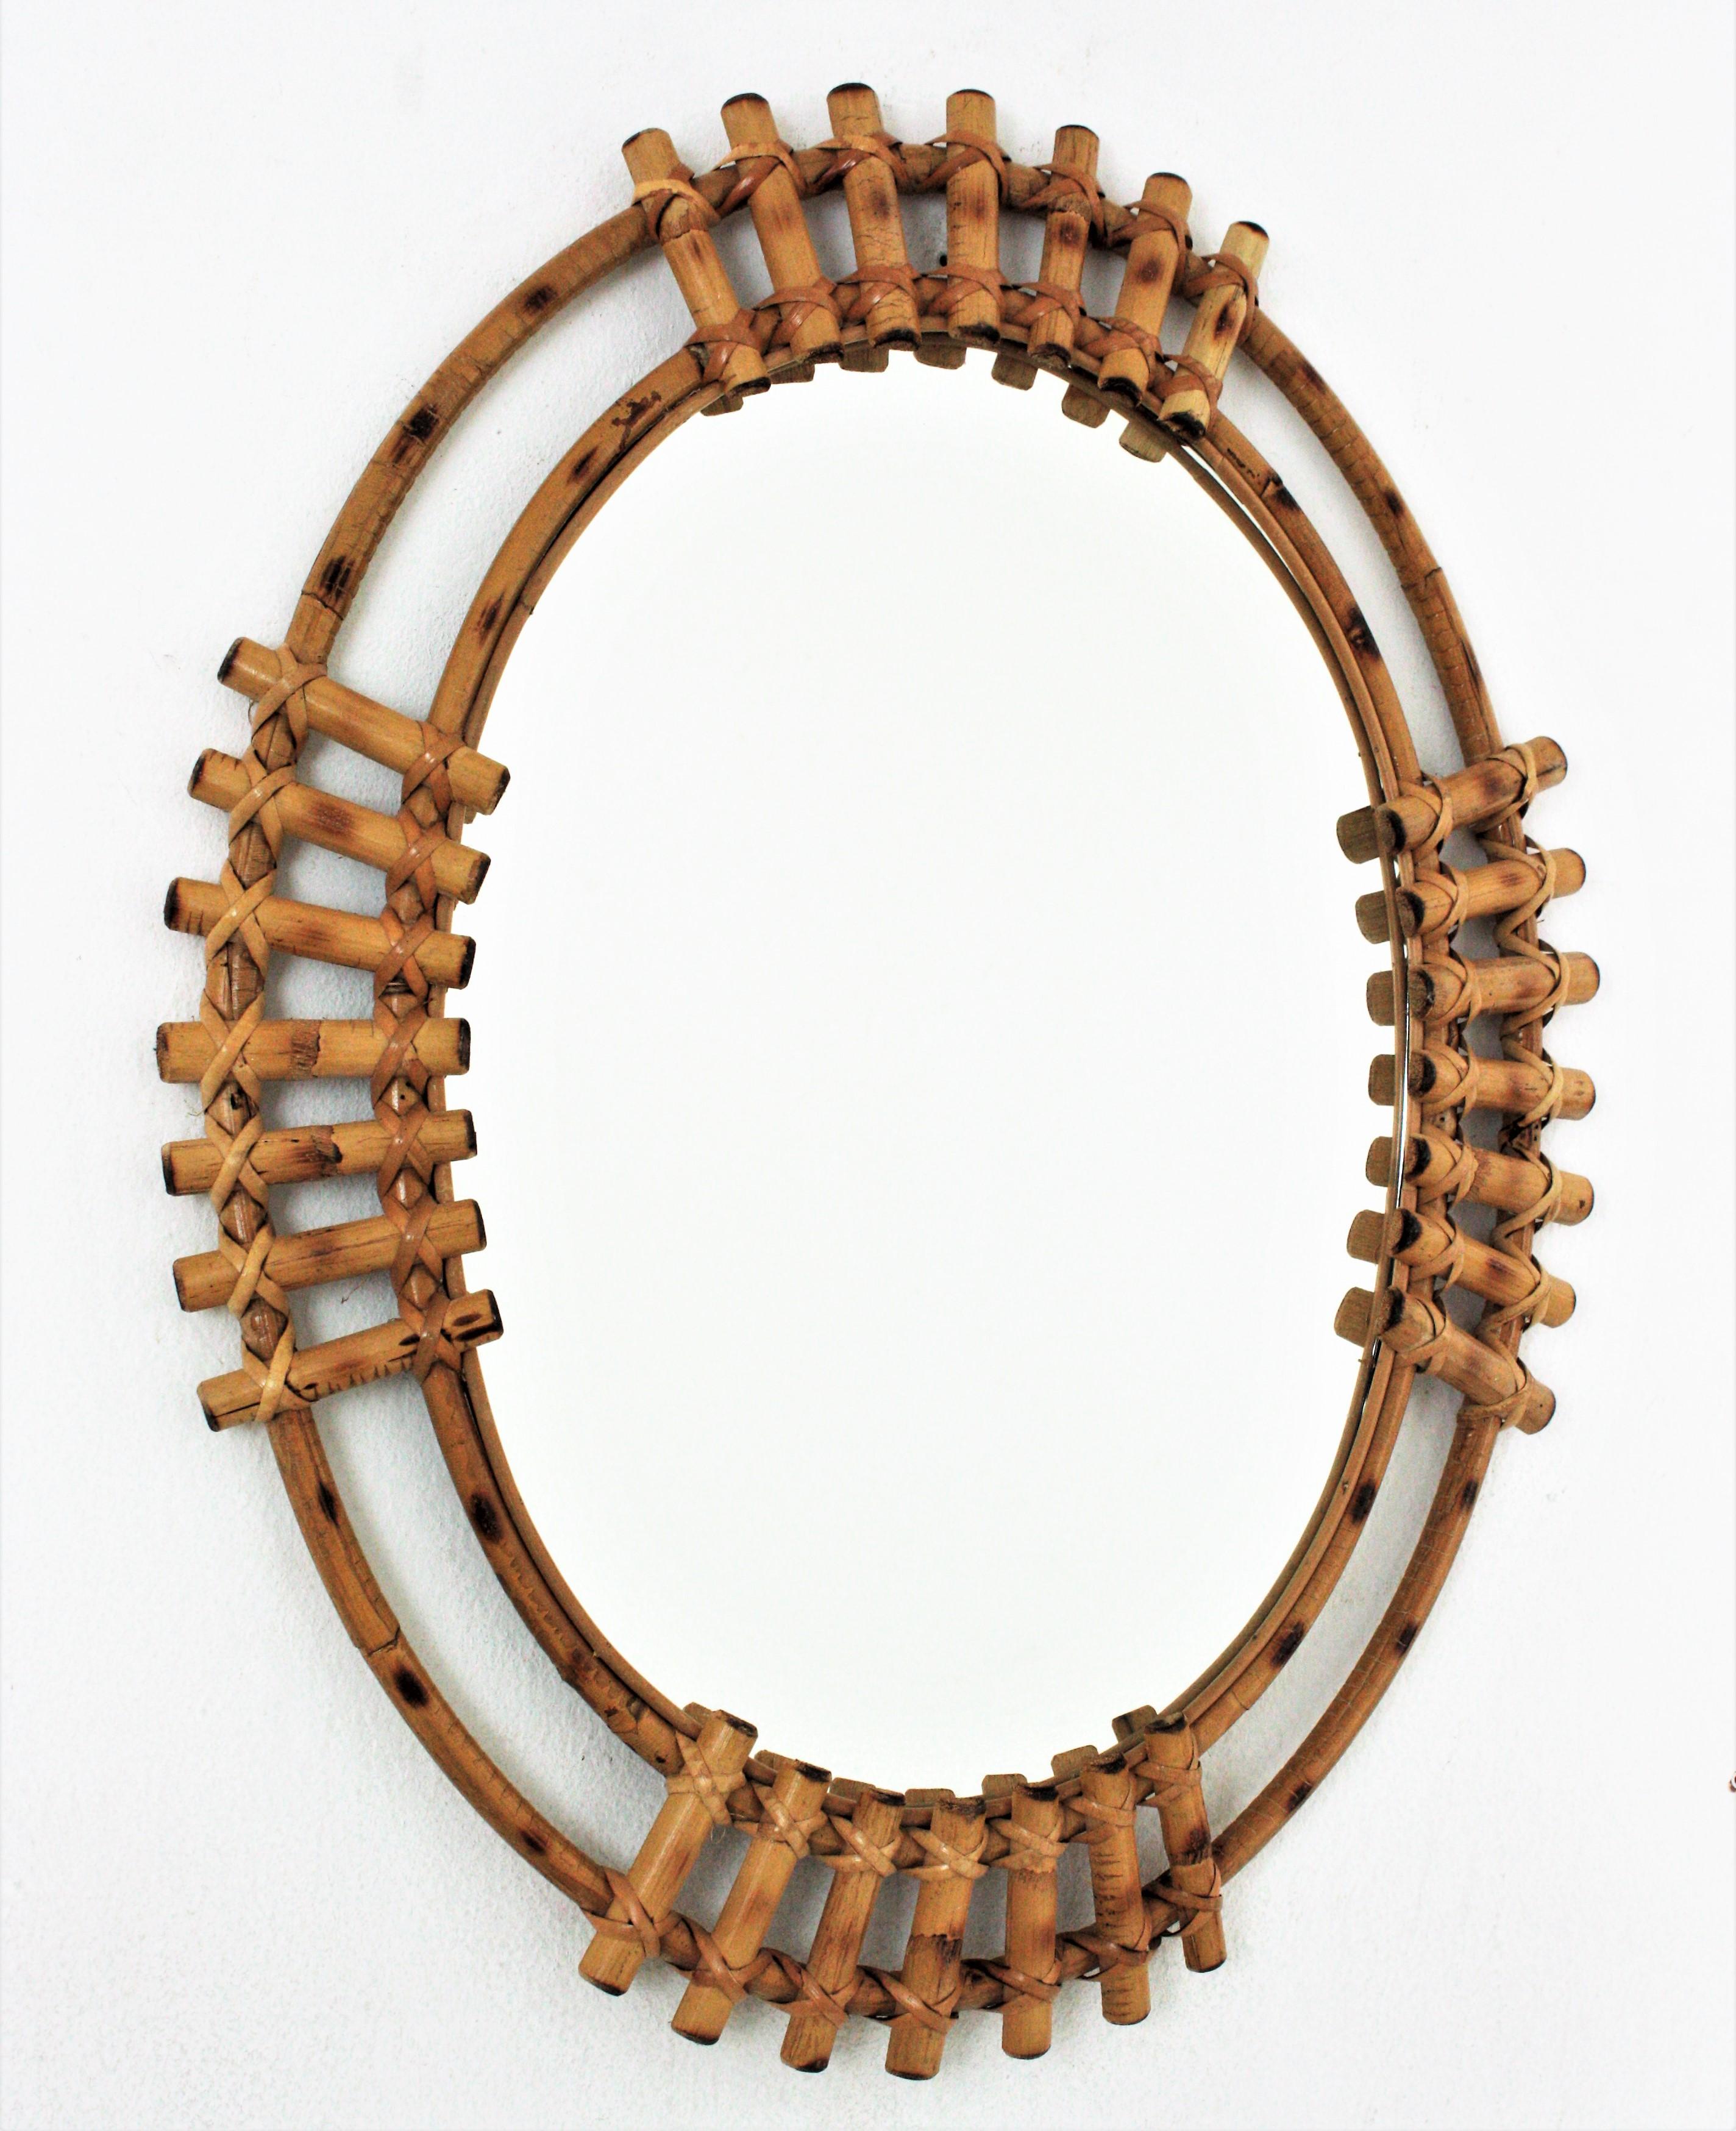 Eye-catching Mid-Century Modern bamboo large oval sunburst mirror, Spain, 1960s.
This wall mirror features a bamboo double frame with split bamboo canes in sunburst disposition.
The large mirror surface allows to use it in a bathroom, dressing